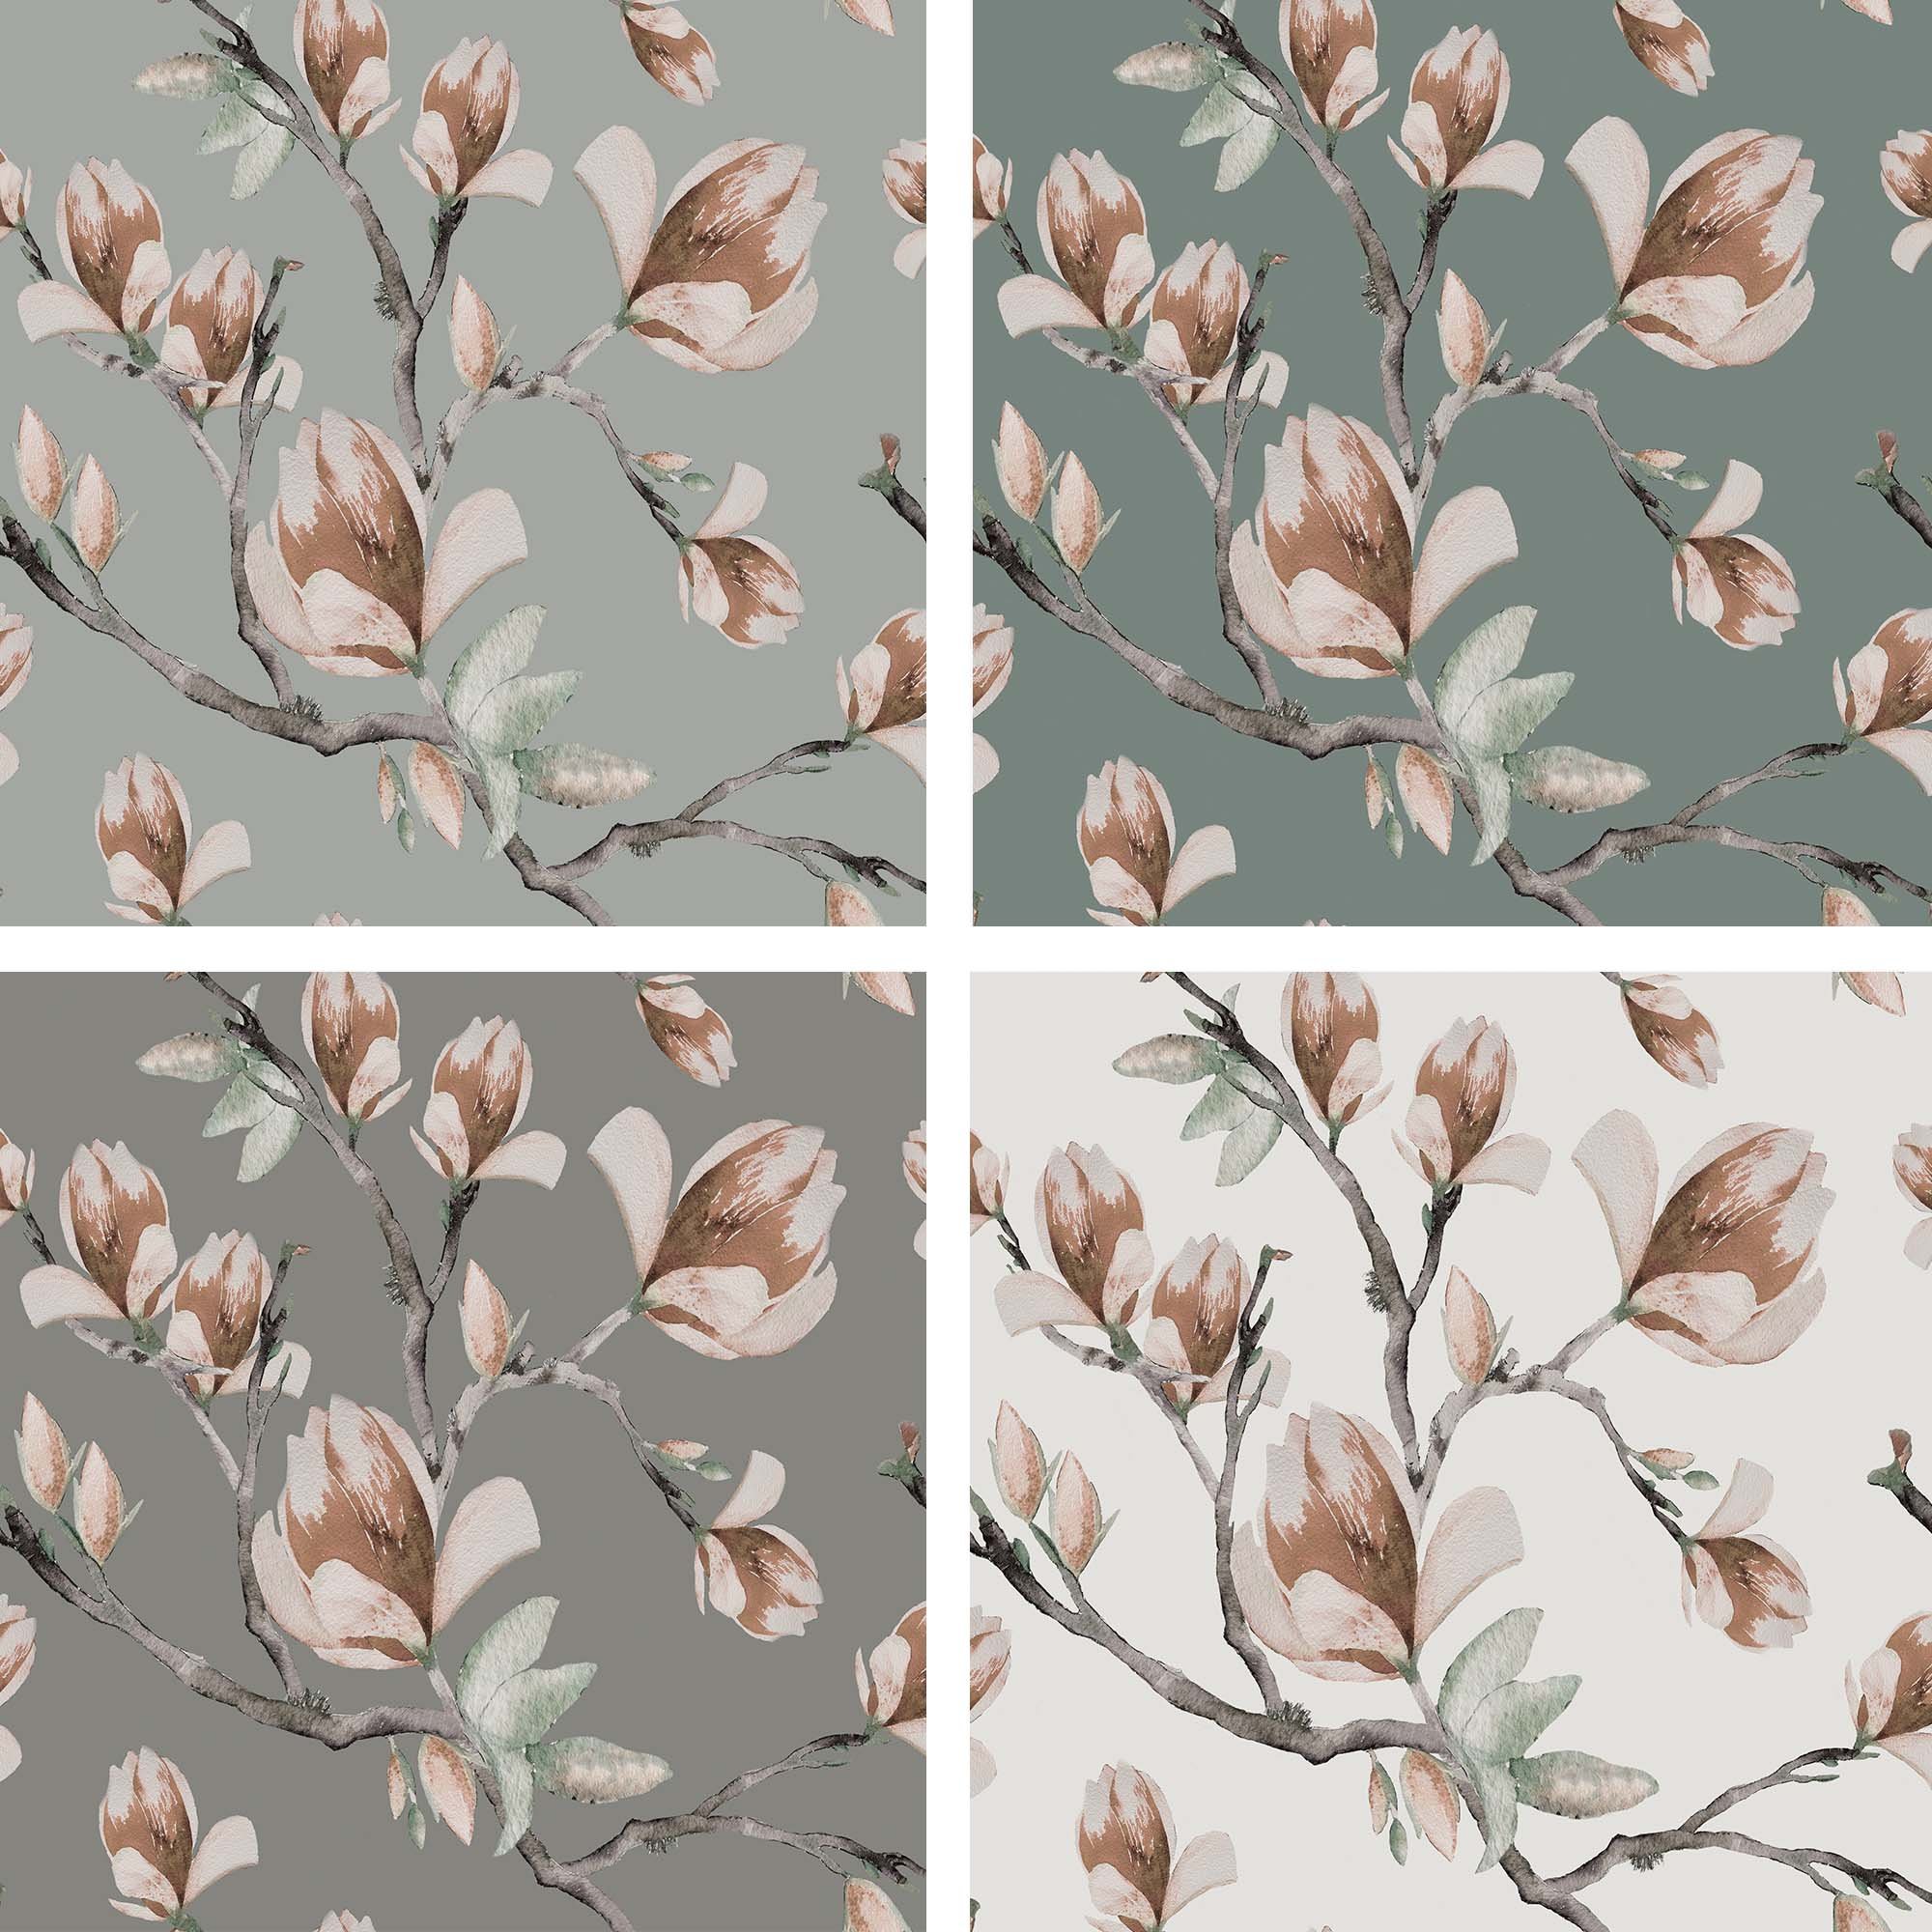 Magnolias and Branches in Neutral Color Study